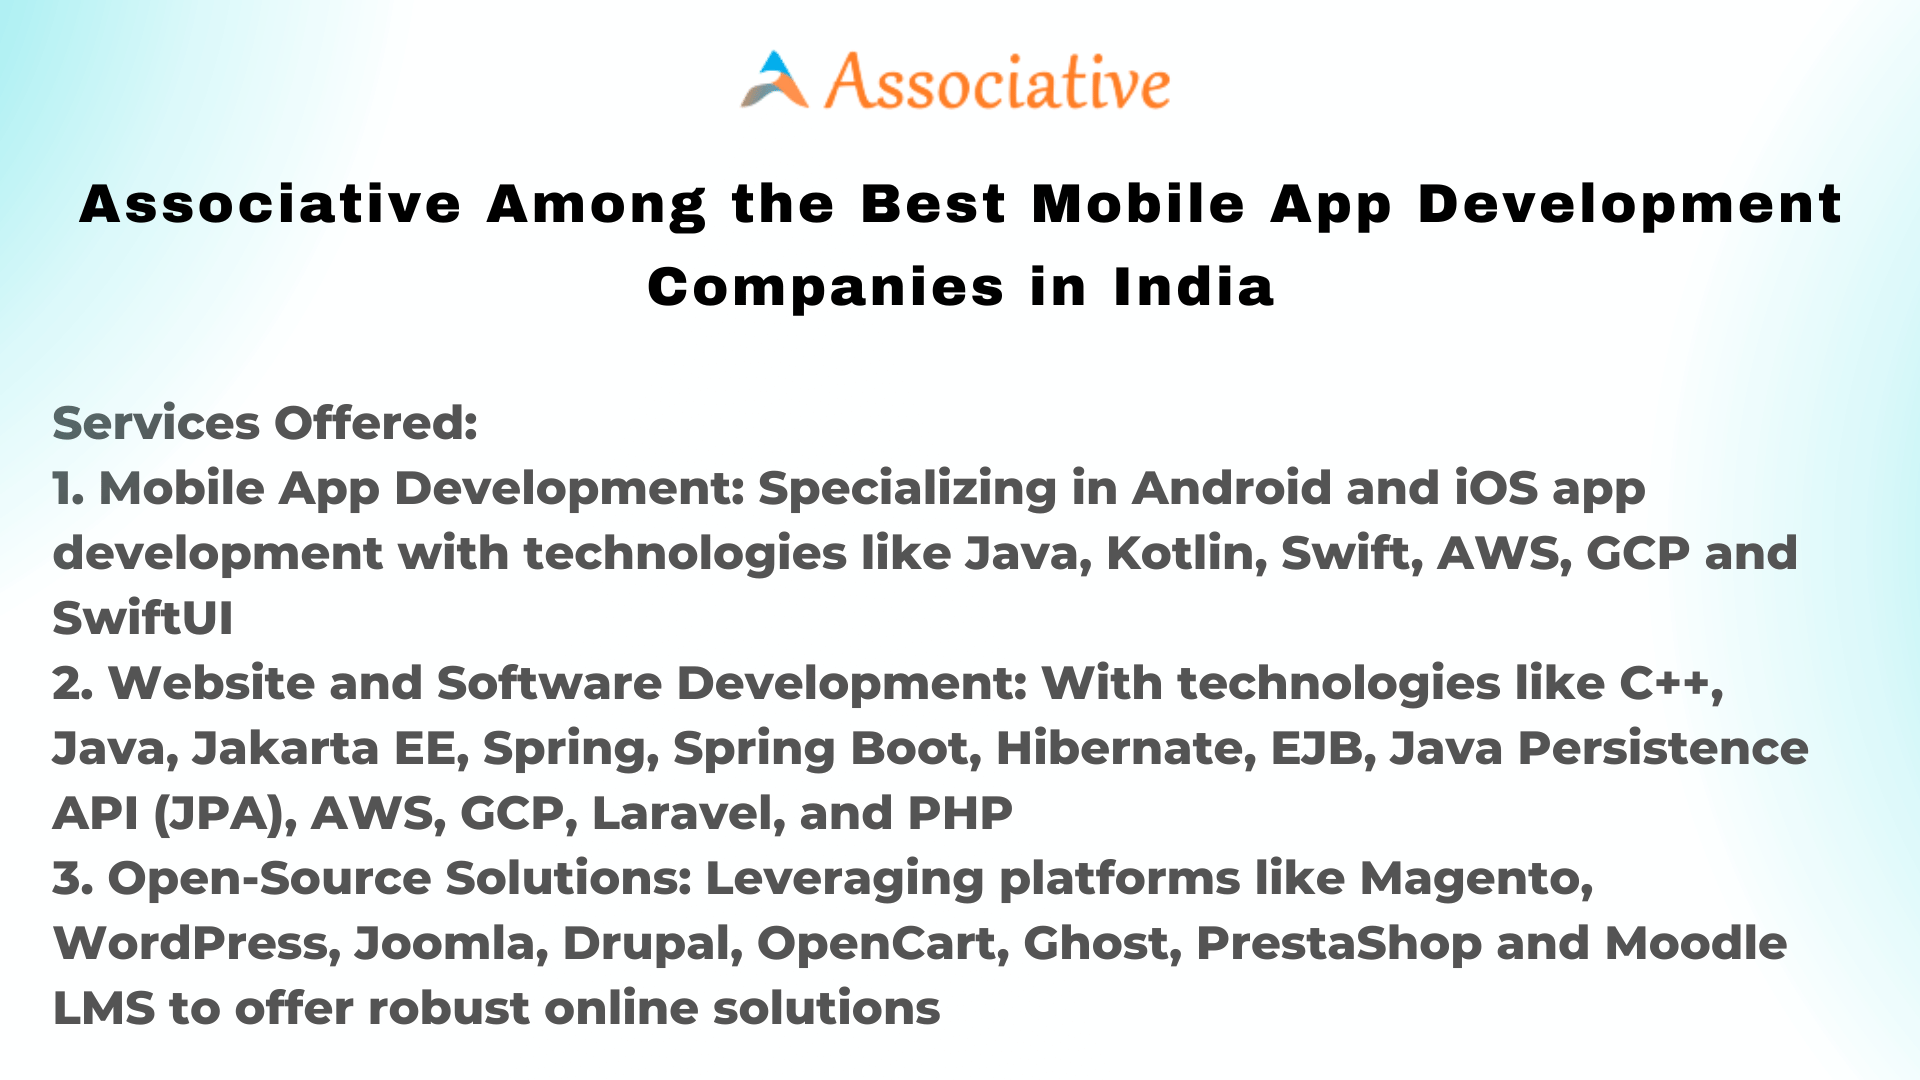 Associative Among the Best Mobile App Development Companies in India